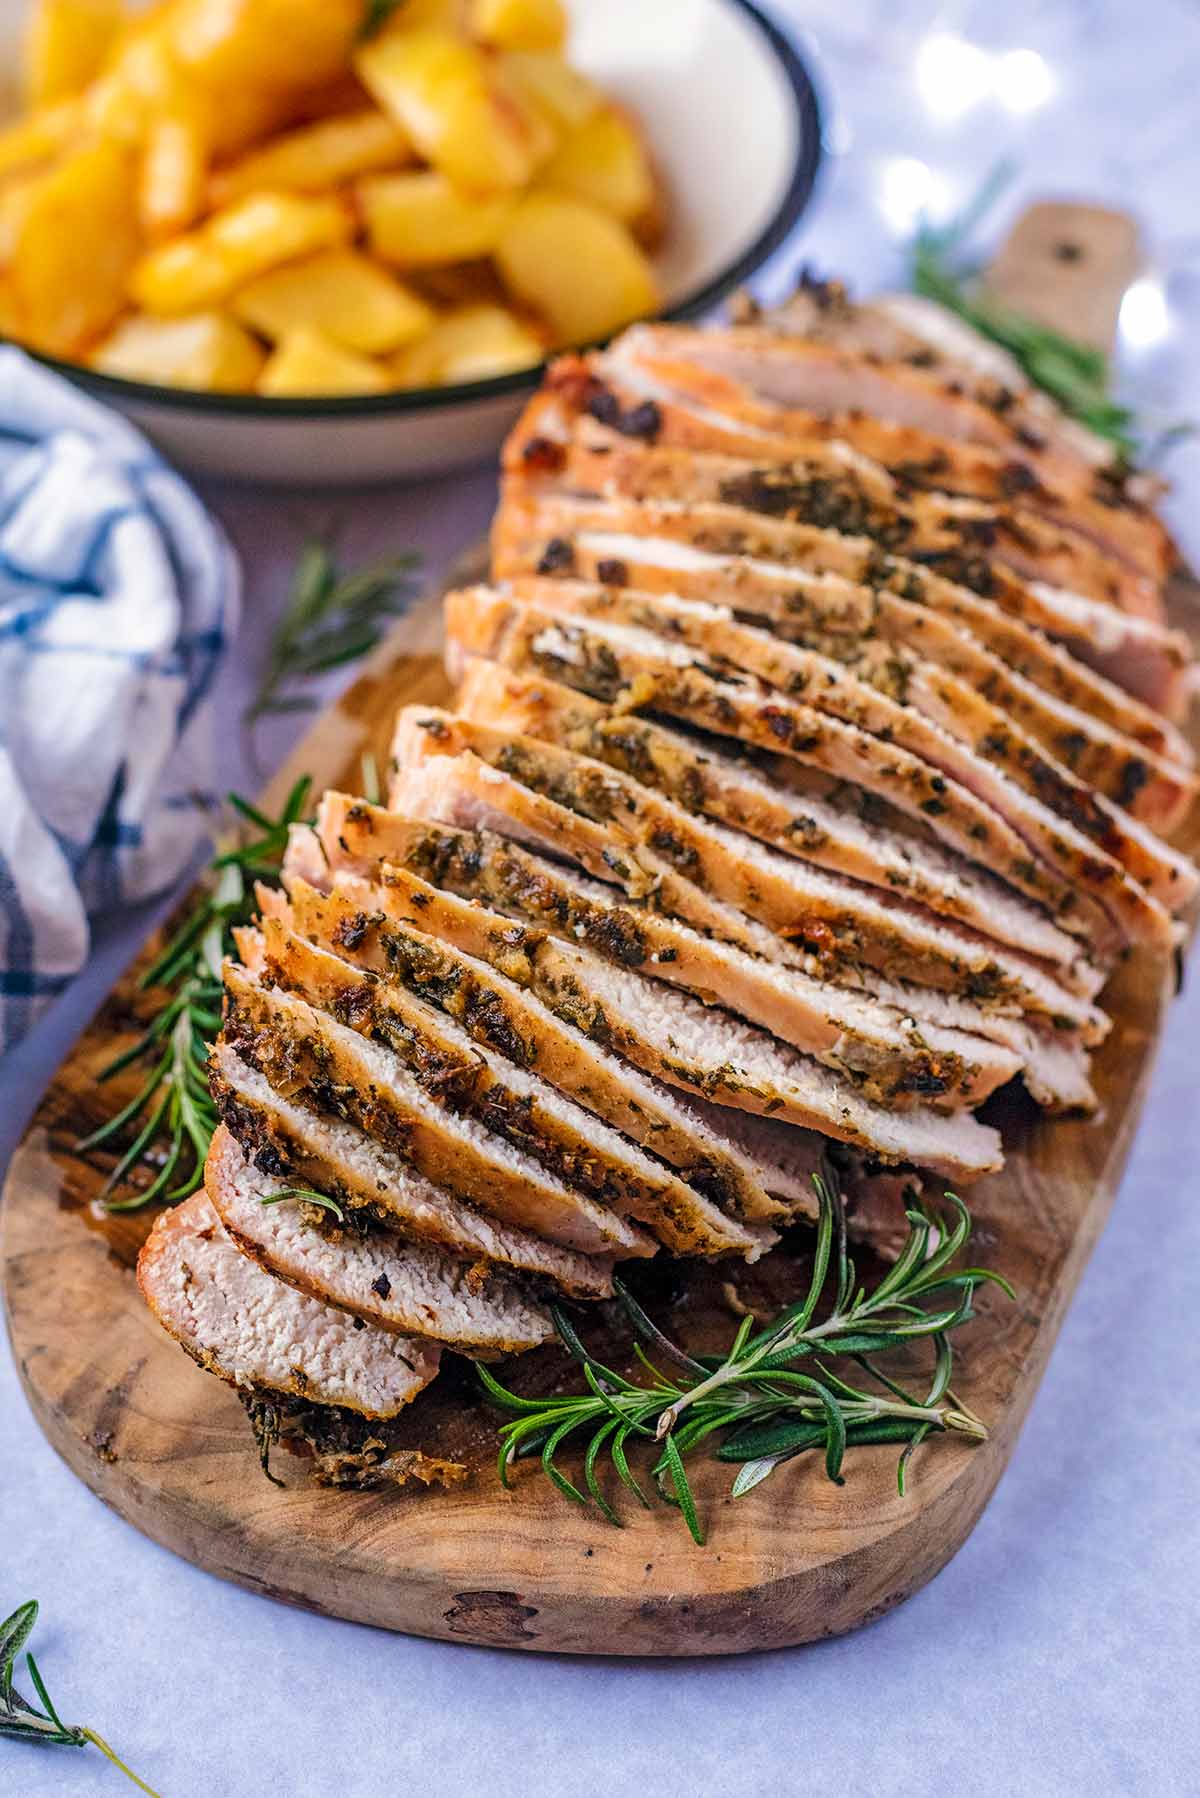 Thin slices of turkey on a wooden serving board.